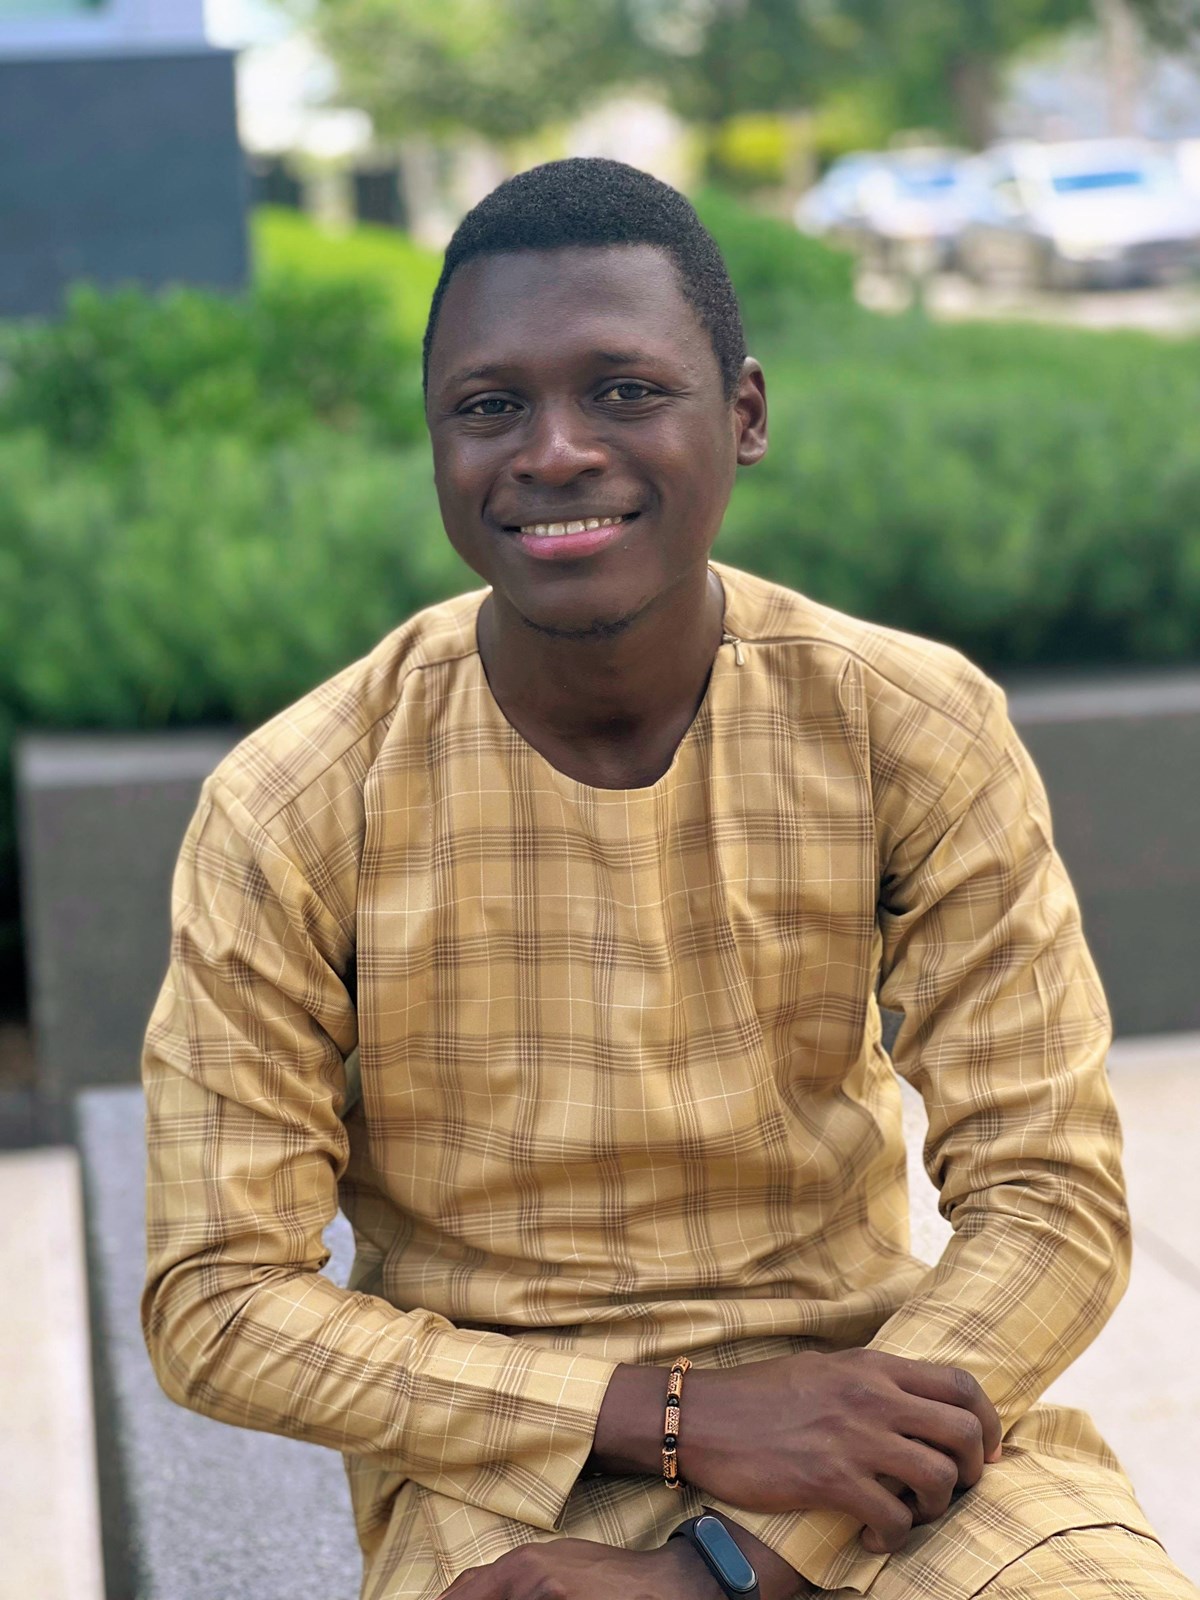 Esan Olorunfemi James sitting down outside  wearing a yellow plaid shirt and smiling at the camera. 